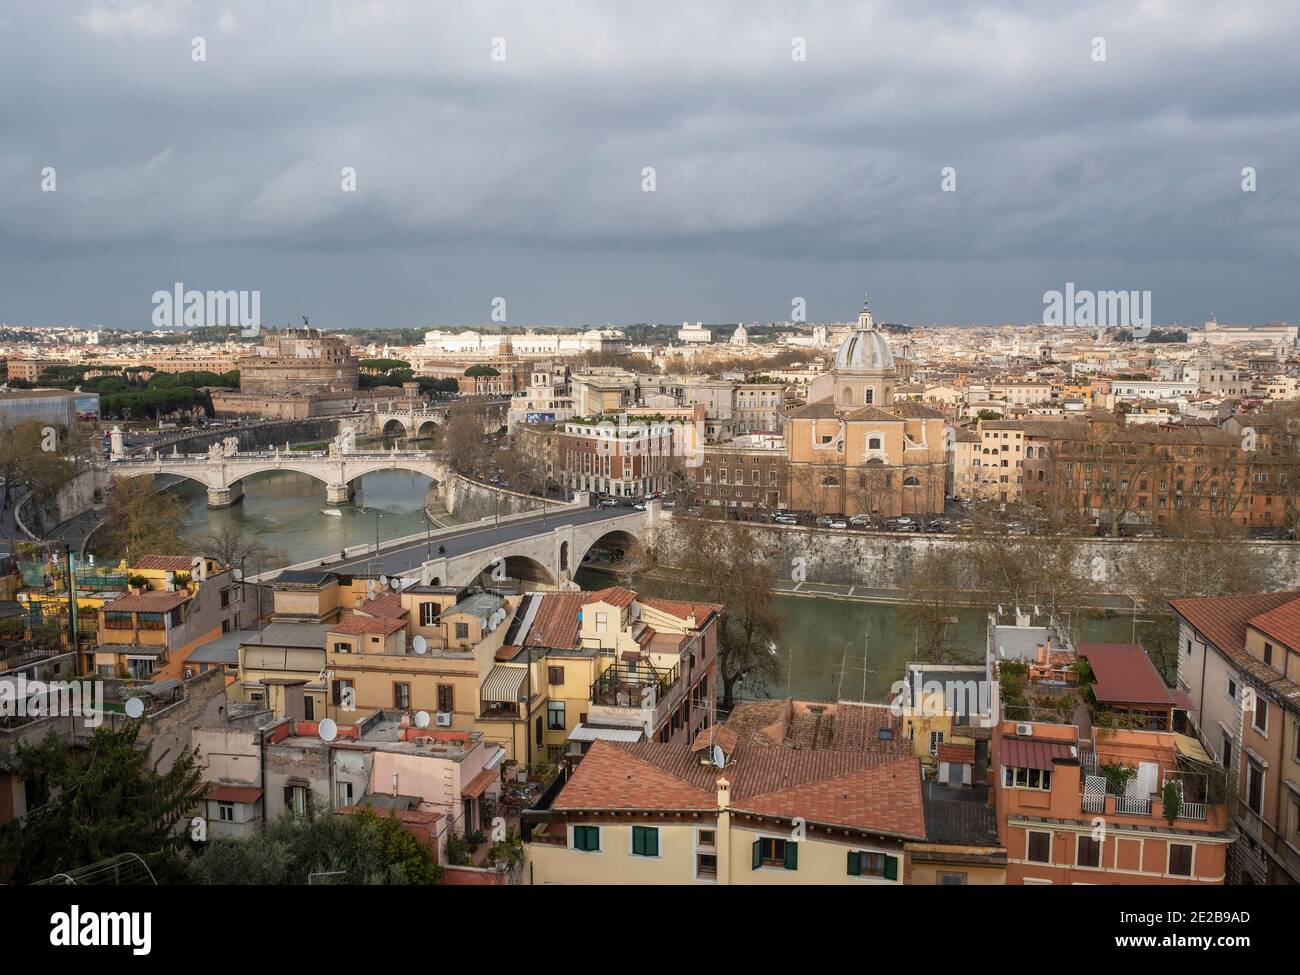 View across the River Tiber and bridges to central Rome from Trastevere. The Church of San Giovanni Battista dei Fiorentini on the riverbank. Stock Photo